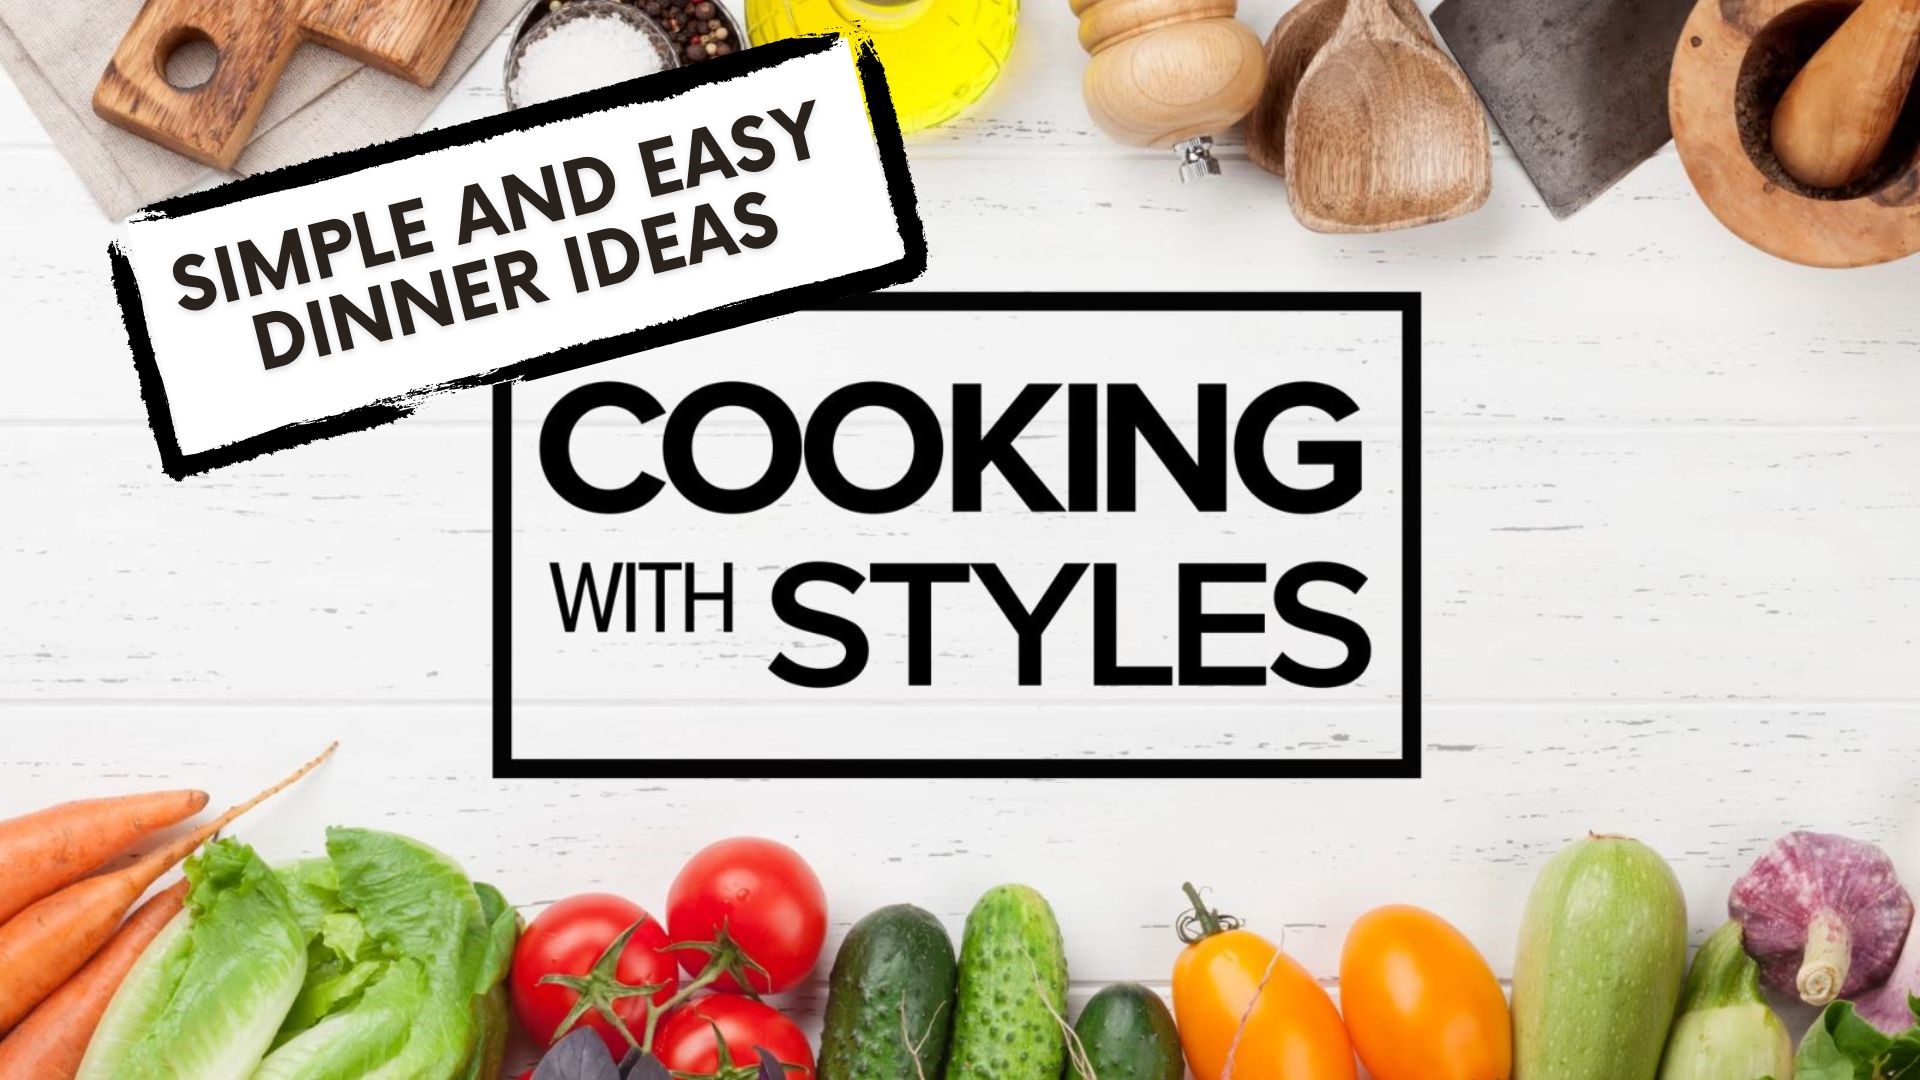 Shawn Styles shares simple and easy dinner recipes for those looking for new ideas. From one pan Greek chicken to rigatoni con vodka sauce, Shawn has you covered.